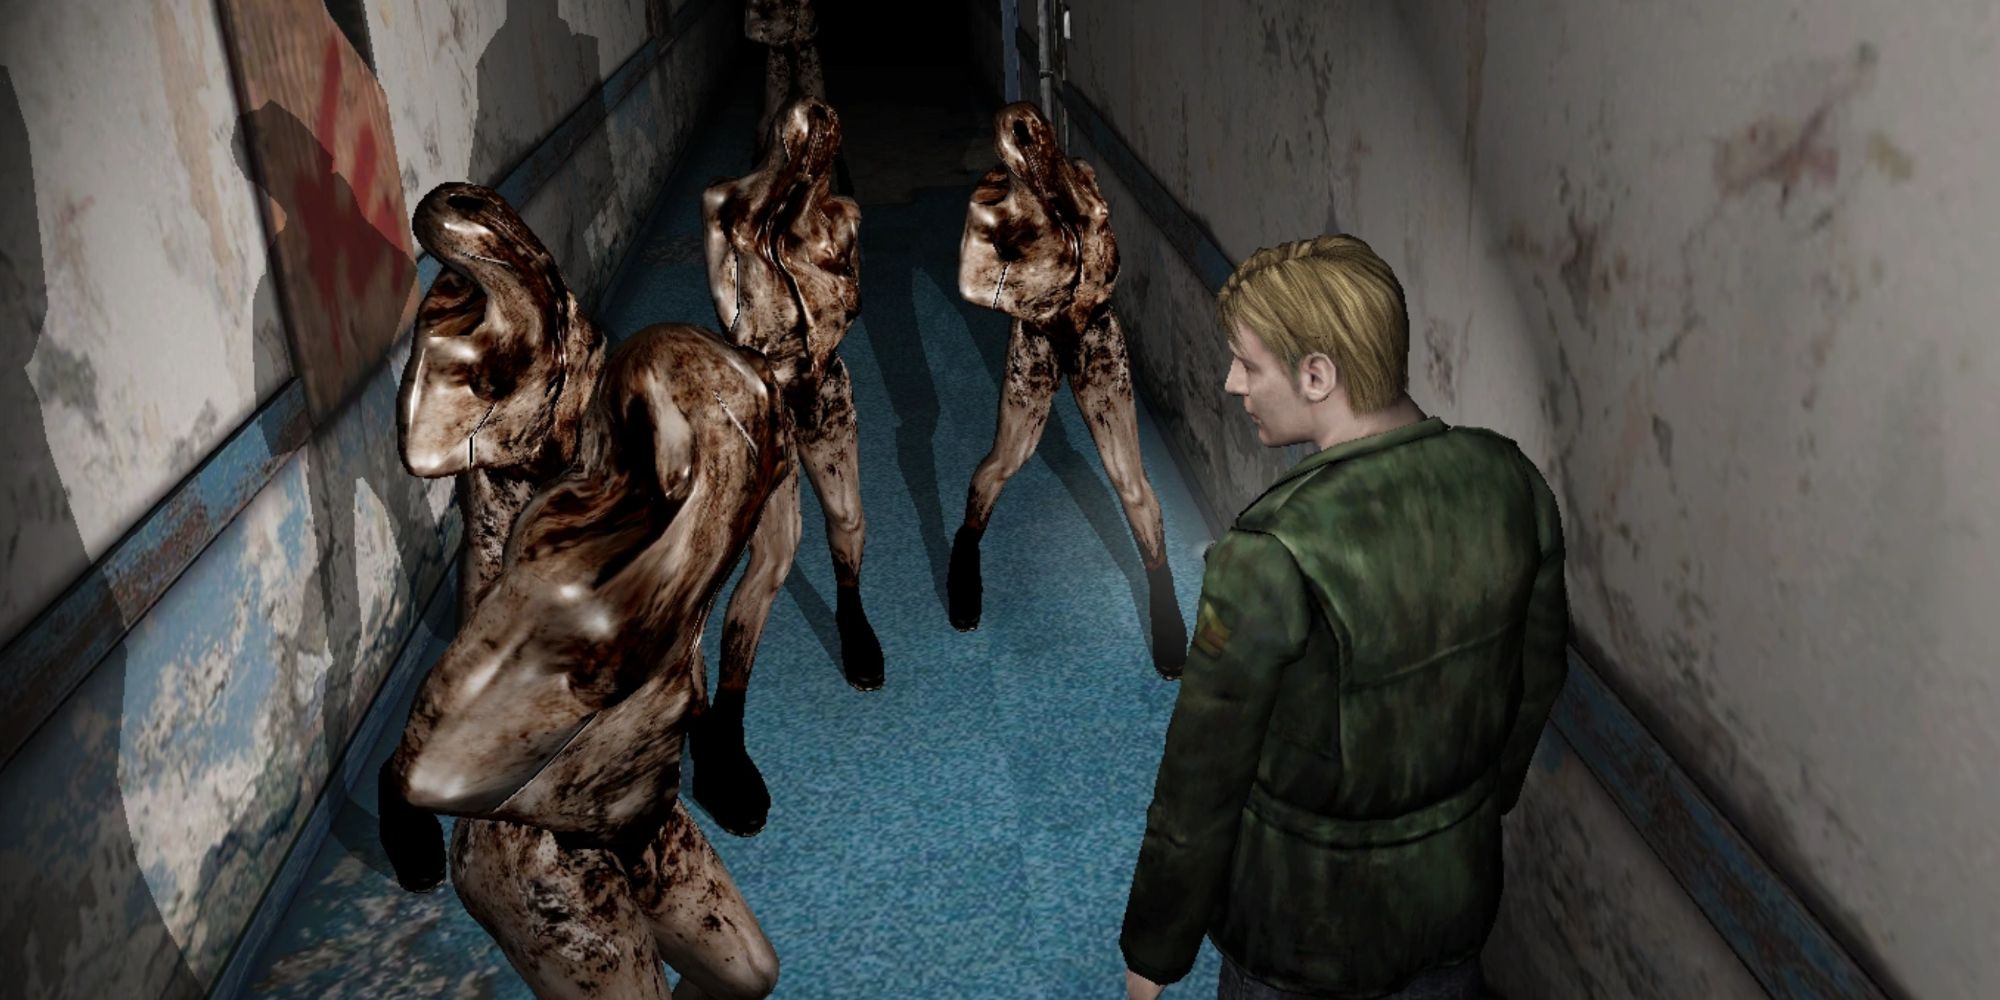 Silent Hill 2's James Sunderland Facing A Group Of Monsters